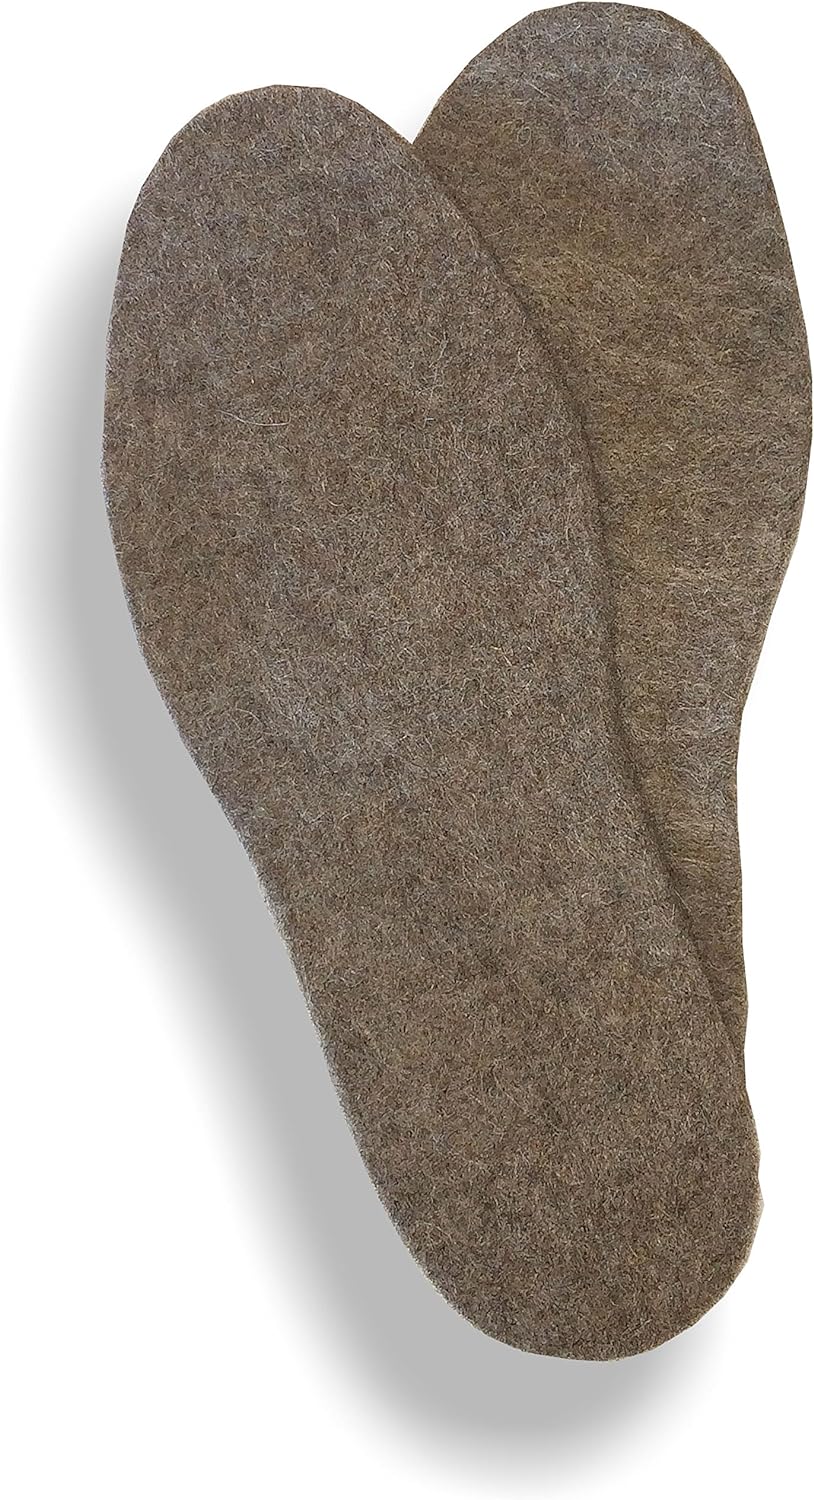 American Bison Insoles